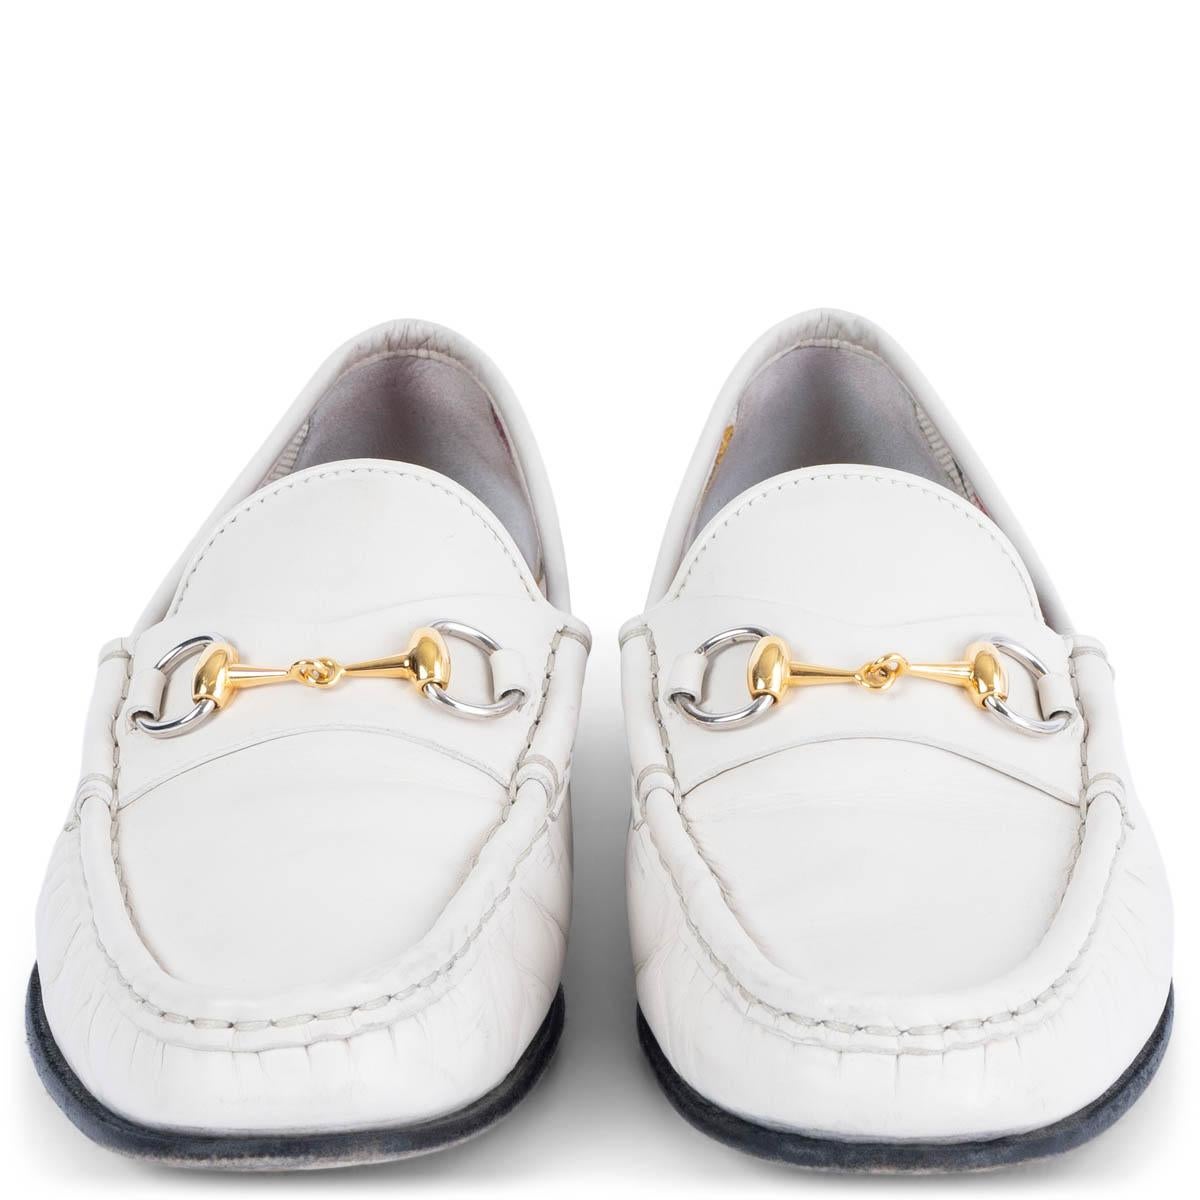 100% authentic Gucci 1953 Horsebit loafers in off-white smooth leather with gold- and silver-tone hardware. Have been worn and are in excellent condition. Come with dust bag. 

Measurements
Imprinted Size	37
Shoe Size	37
Inside Sole	24cm